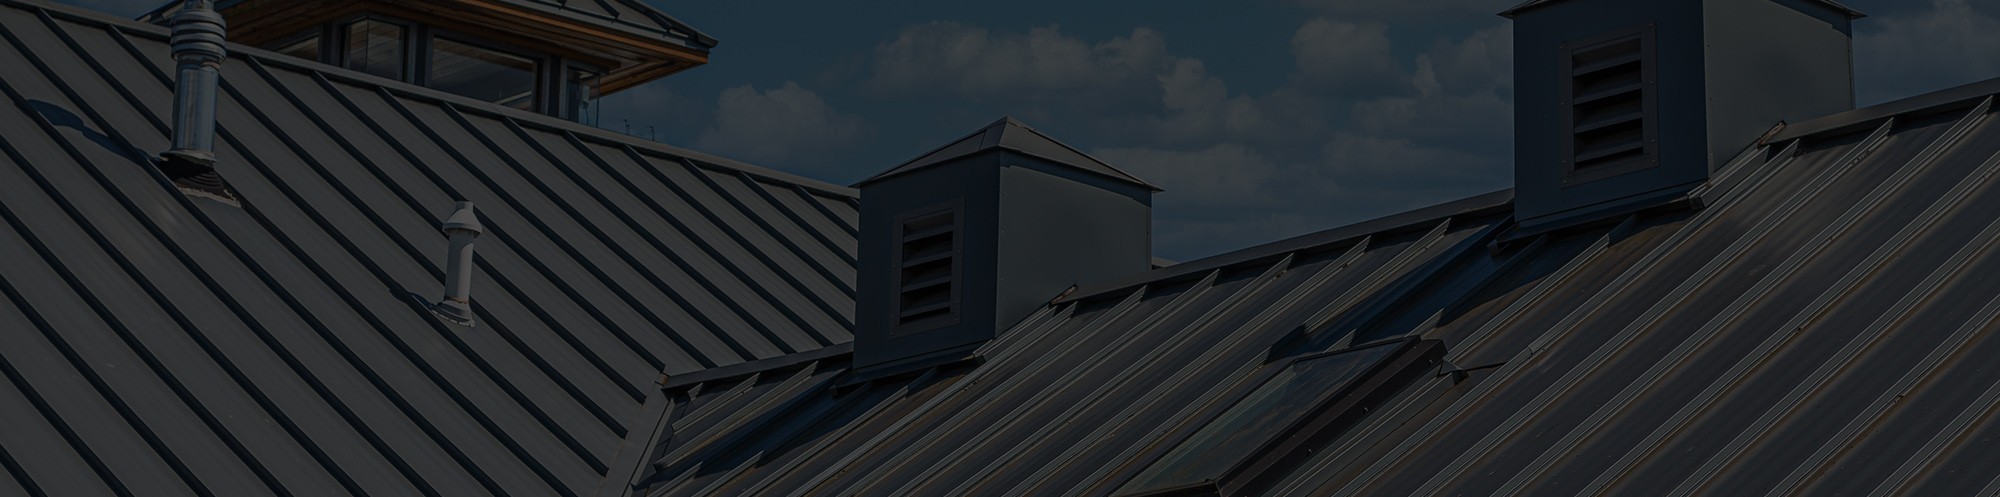 Install a new metal roof to your commercial property in Green Bay